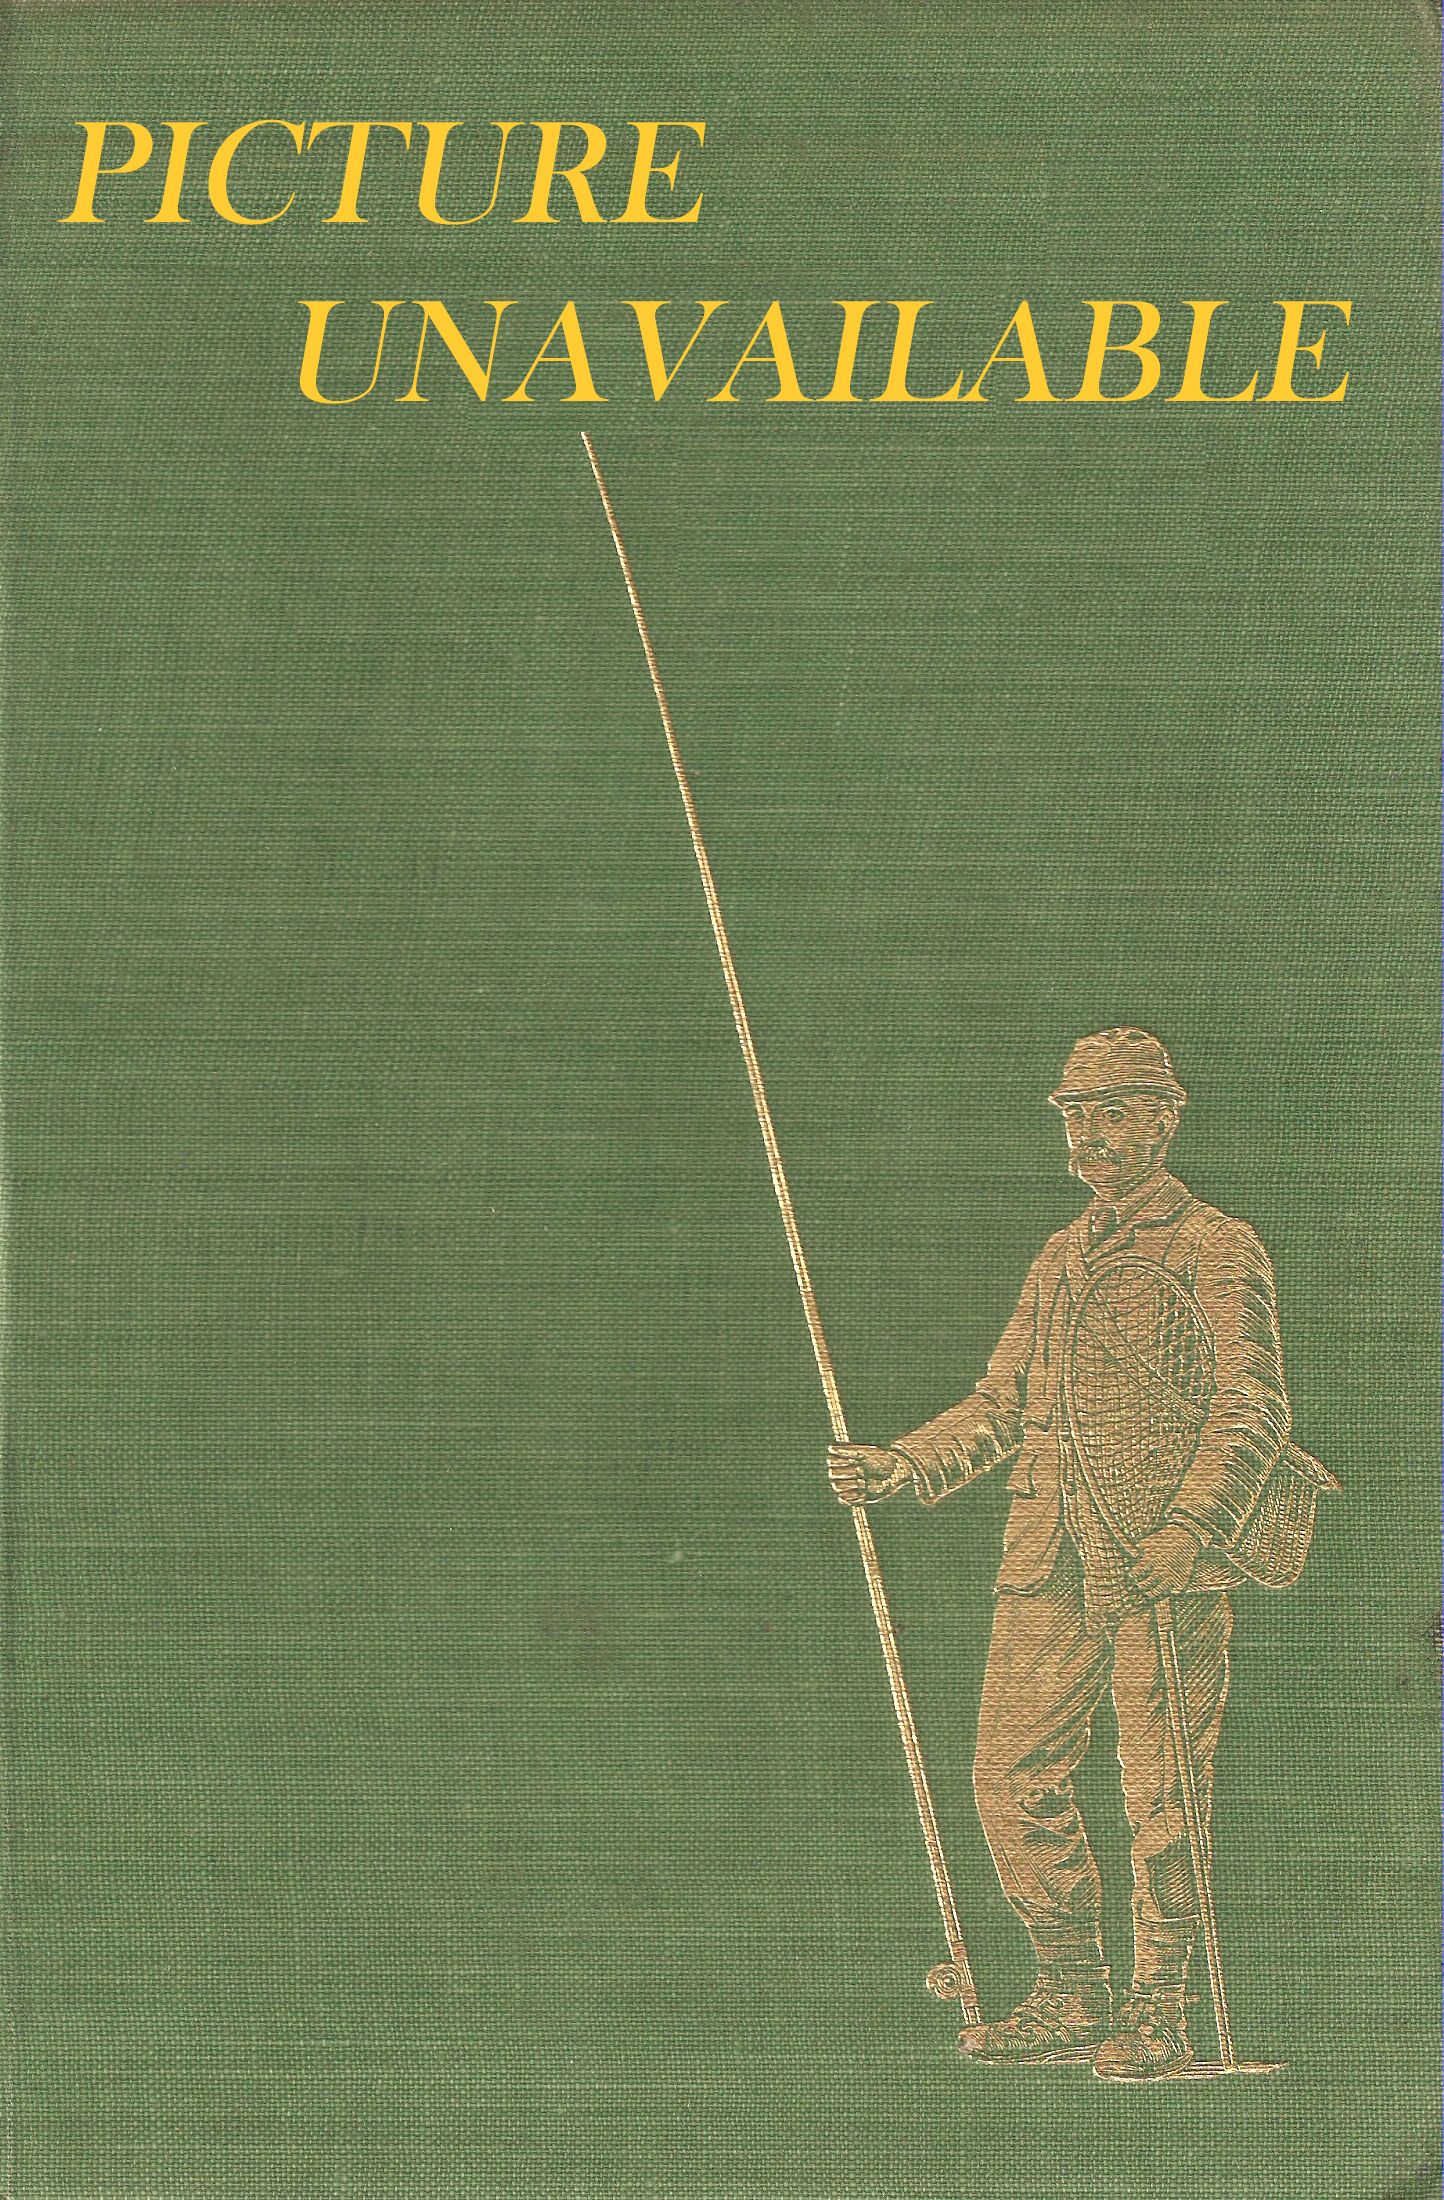 A FLY FISHER'S LIFE. By Charles Ritz. Revised and enarged edition prepared in collaboration with John Piper. 1977 3rd edition reprint.